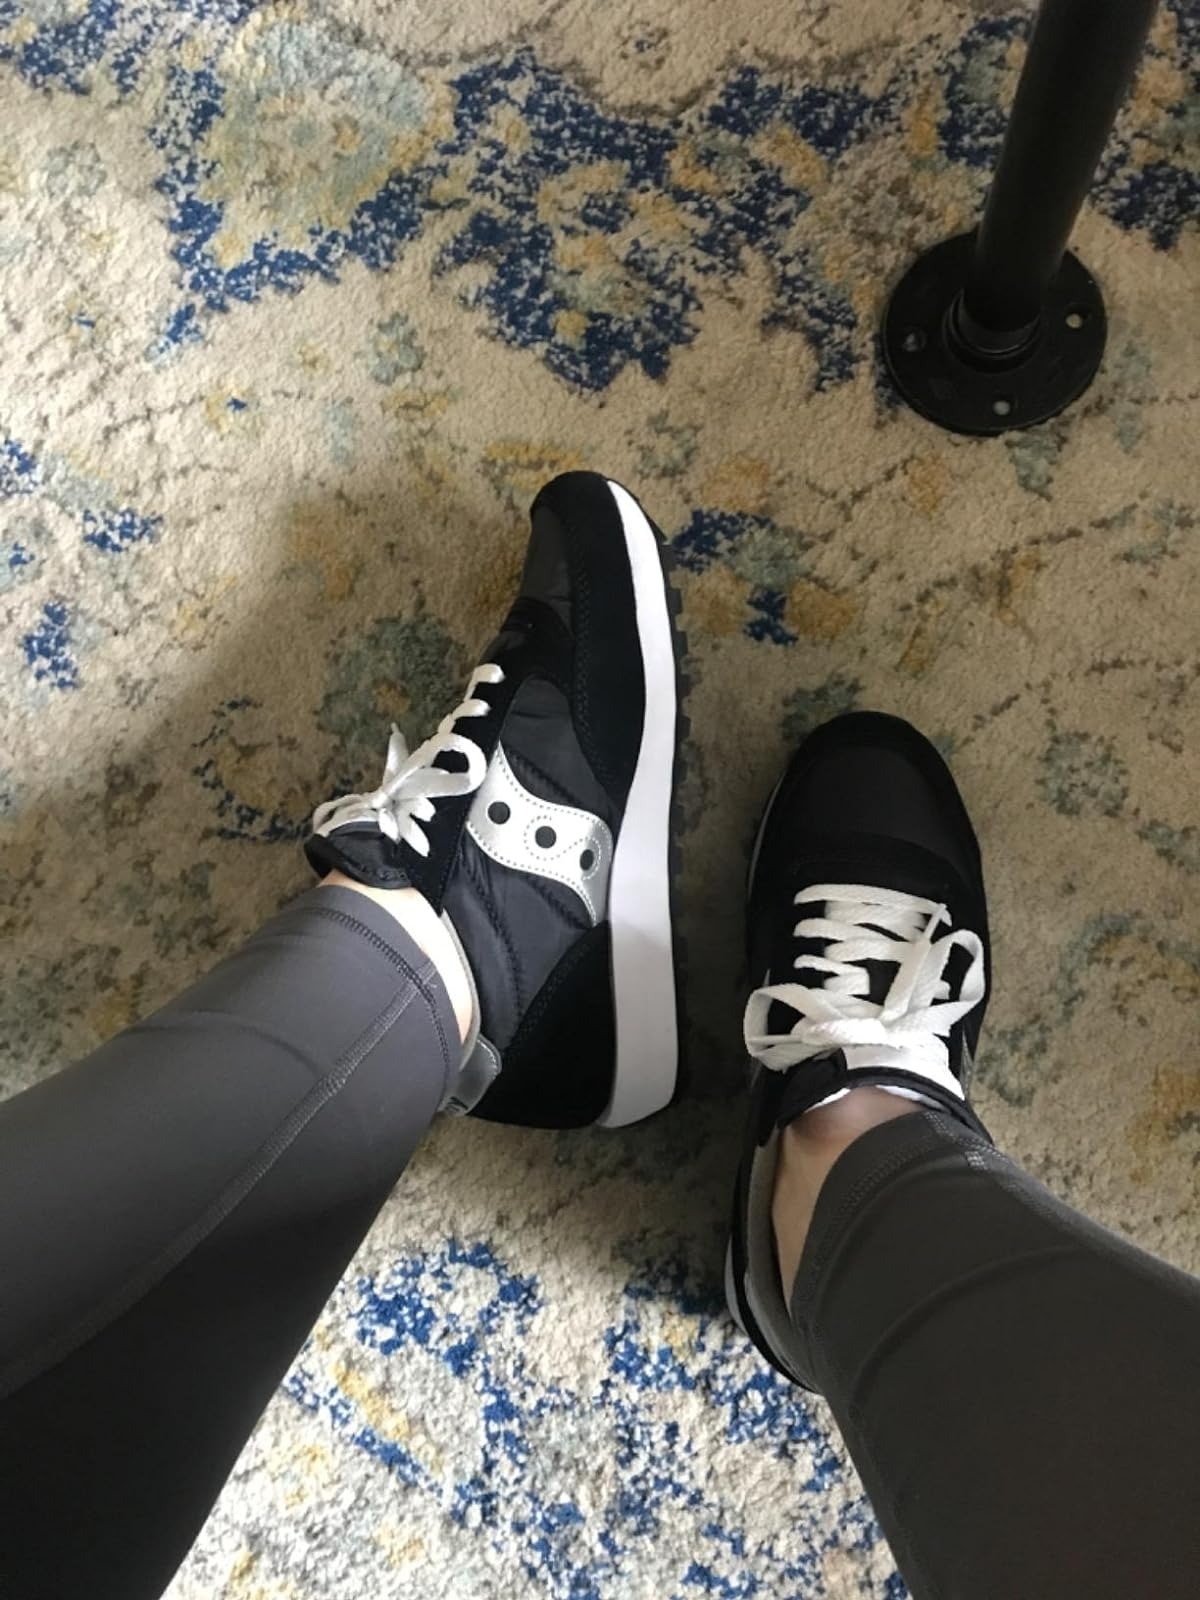 reviewer wearing black and white Saucony sneakers